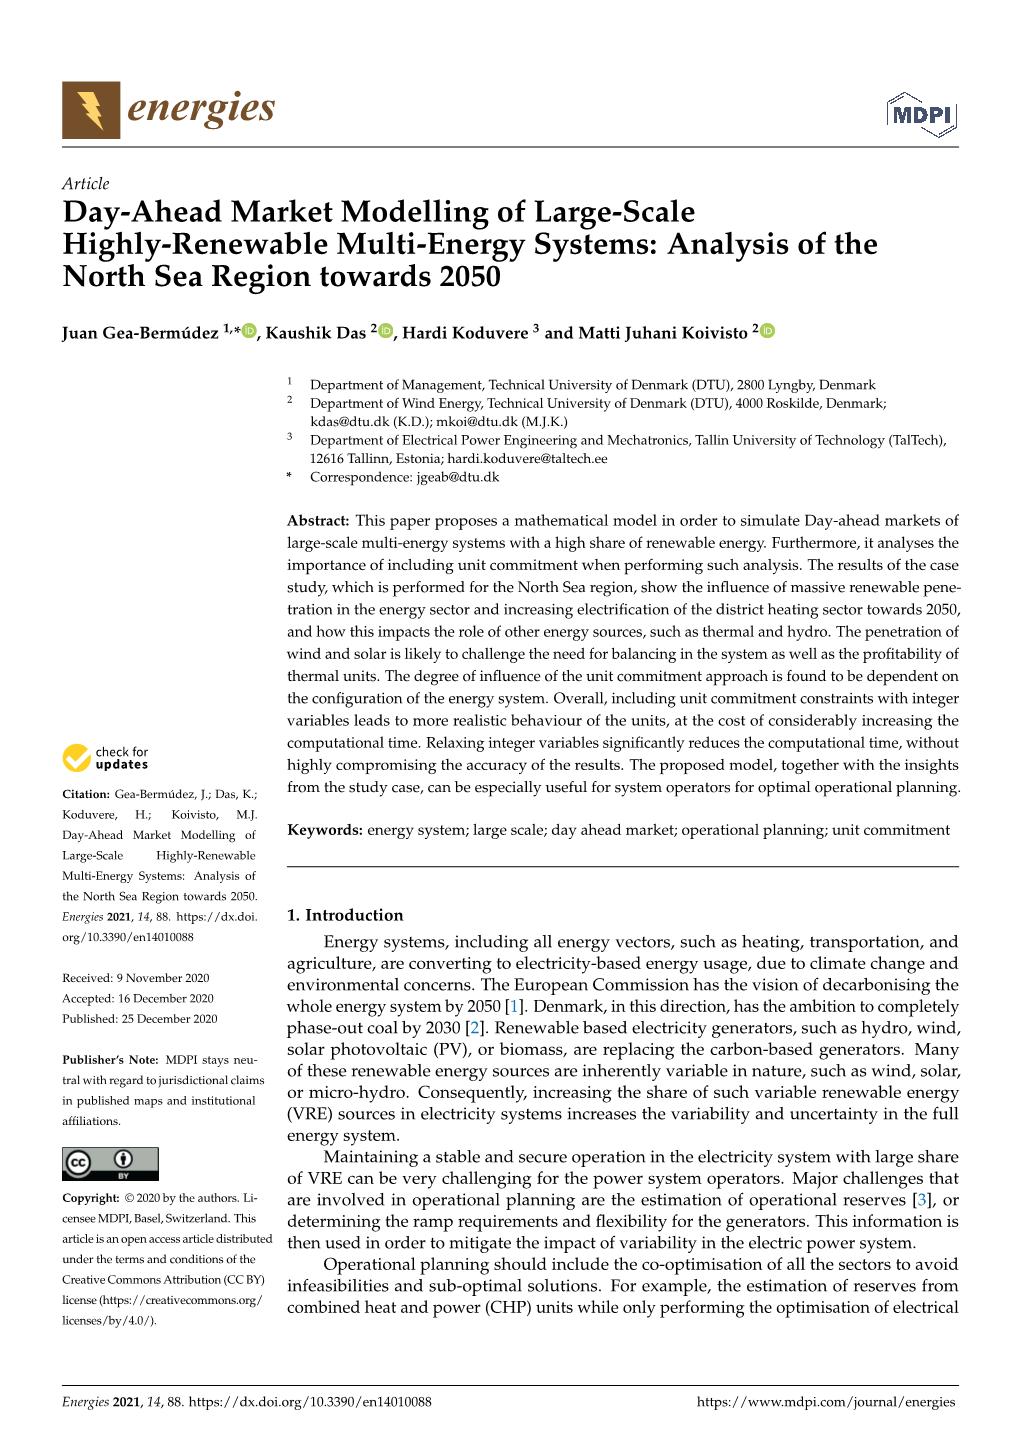 Day-Ahead Market Modelling of Large-Scale Highly-Renewable Multi-Energy Systems: Analysis of the North Sea Region Towards 2050